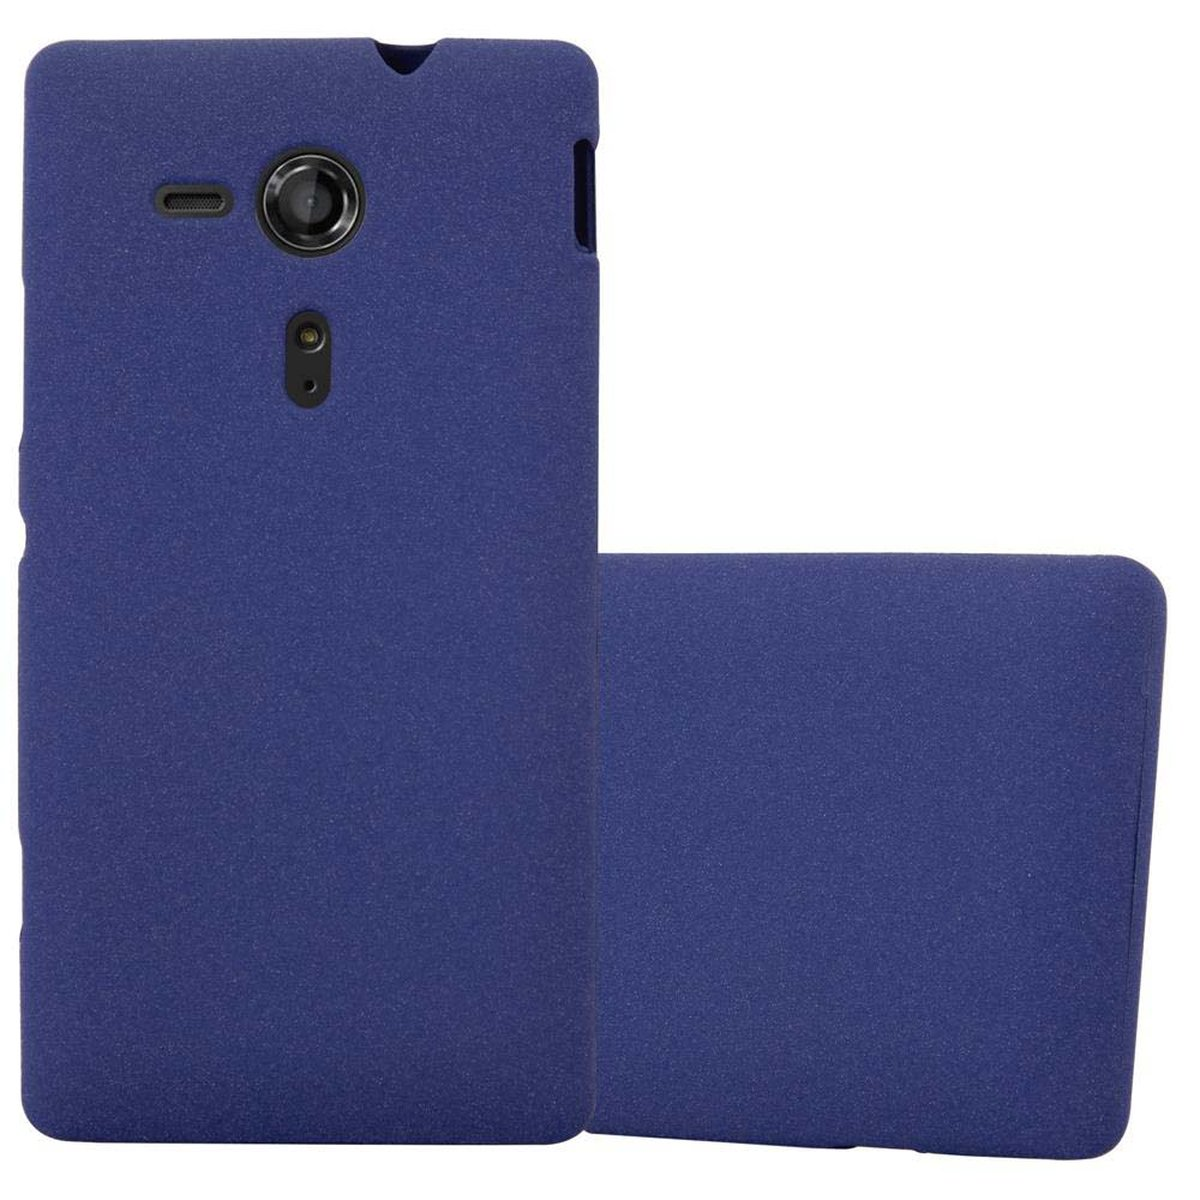 FROST TPU SP, Sony, Backcover, Xperia DUNKEL Frosted BLAU Schutzhülle, CADORABO